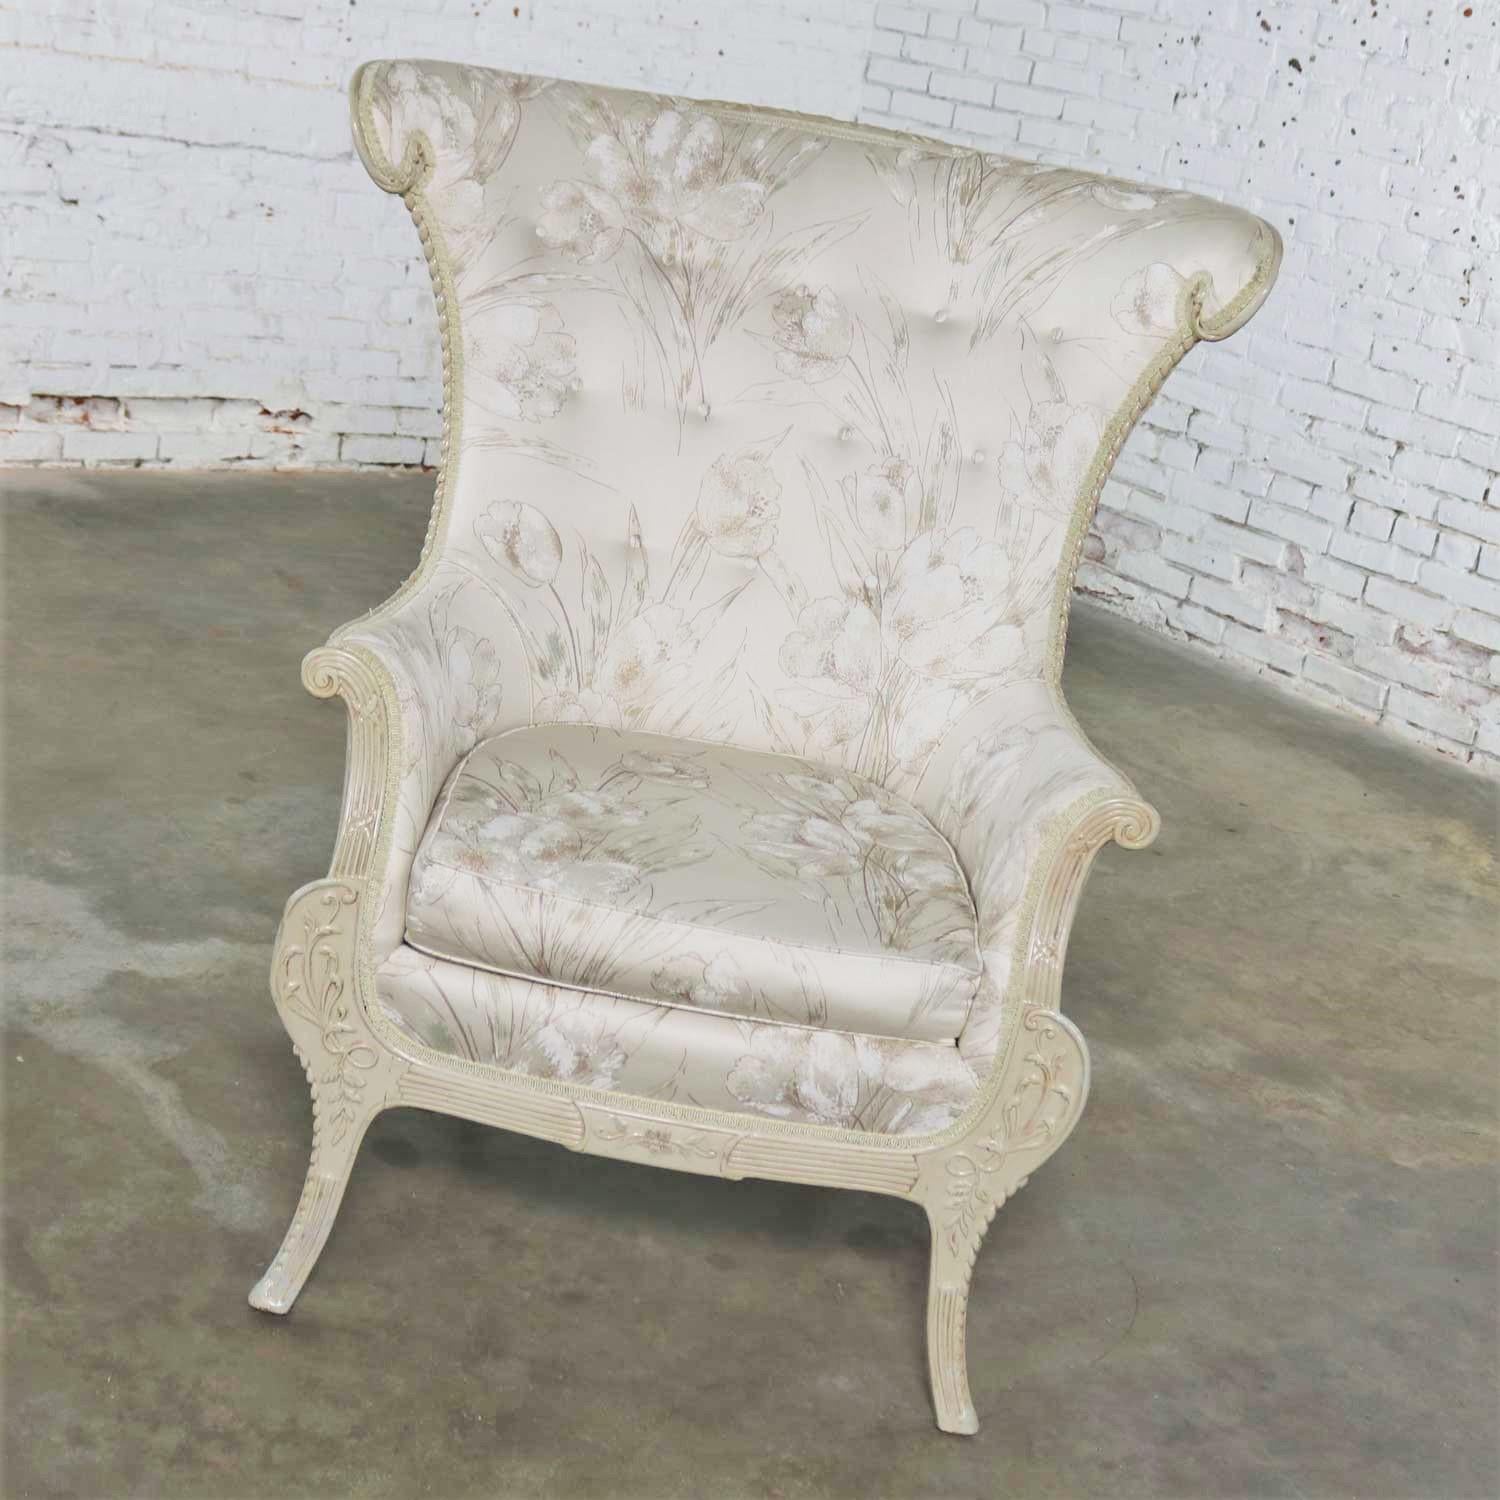 Gorgeous large wingback lounge chair in a neoclassic French style with an antique white finish on the carved wood frame and an antique white and taupe upholstery fabric. It is in wonderful vintage condition and if you like the fabric, ready to use.